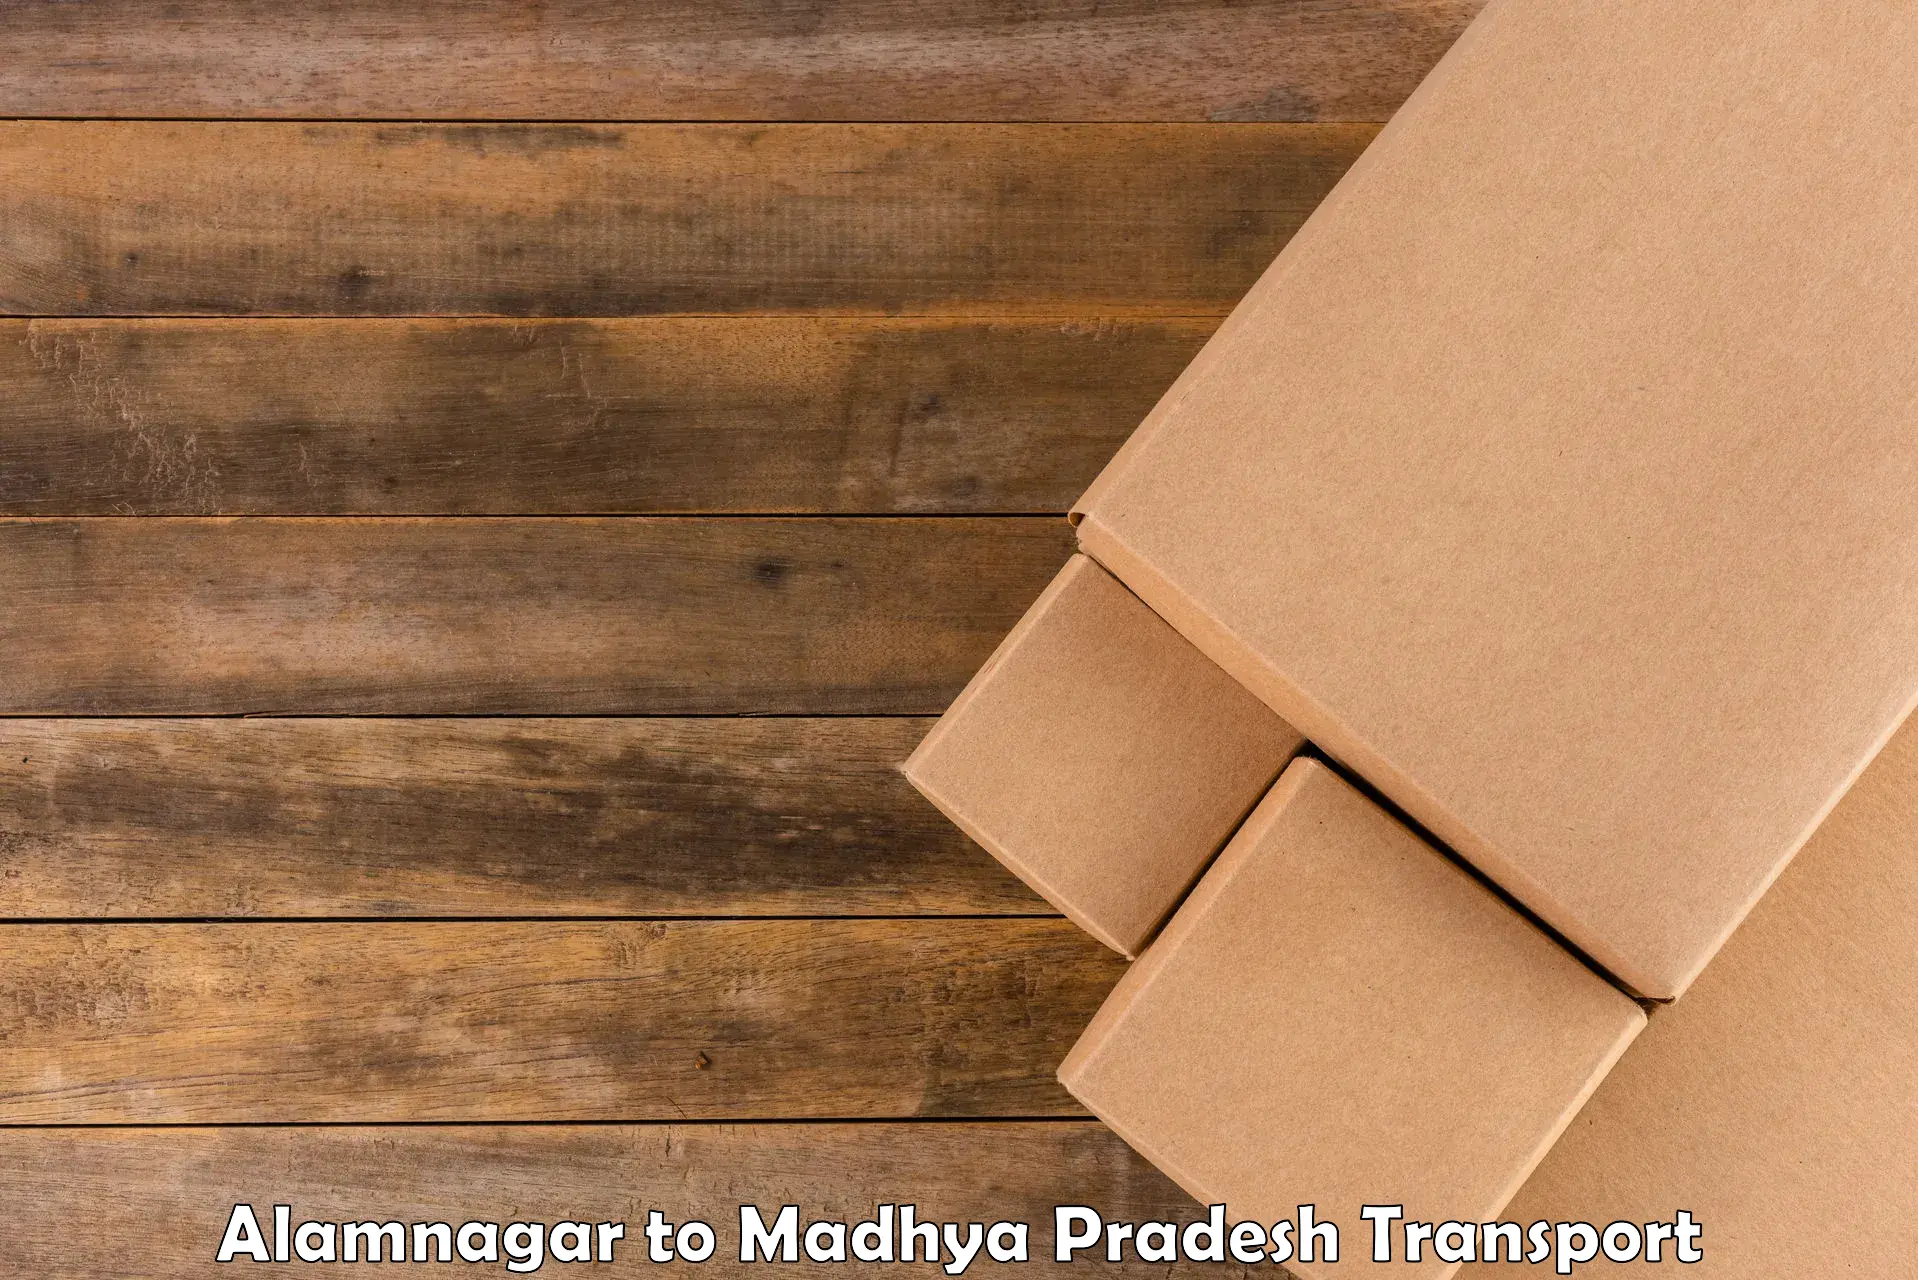 Vehicle transport services in Alamnagar to Bhopal